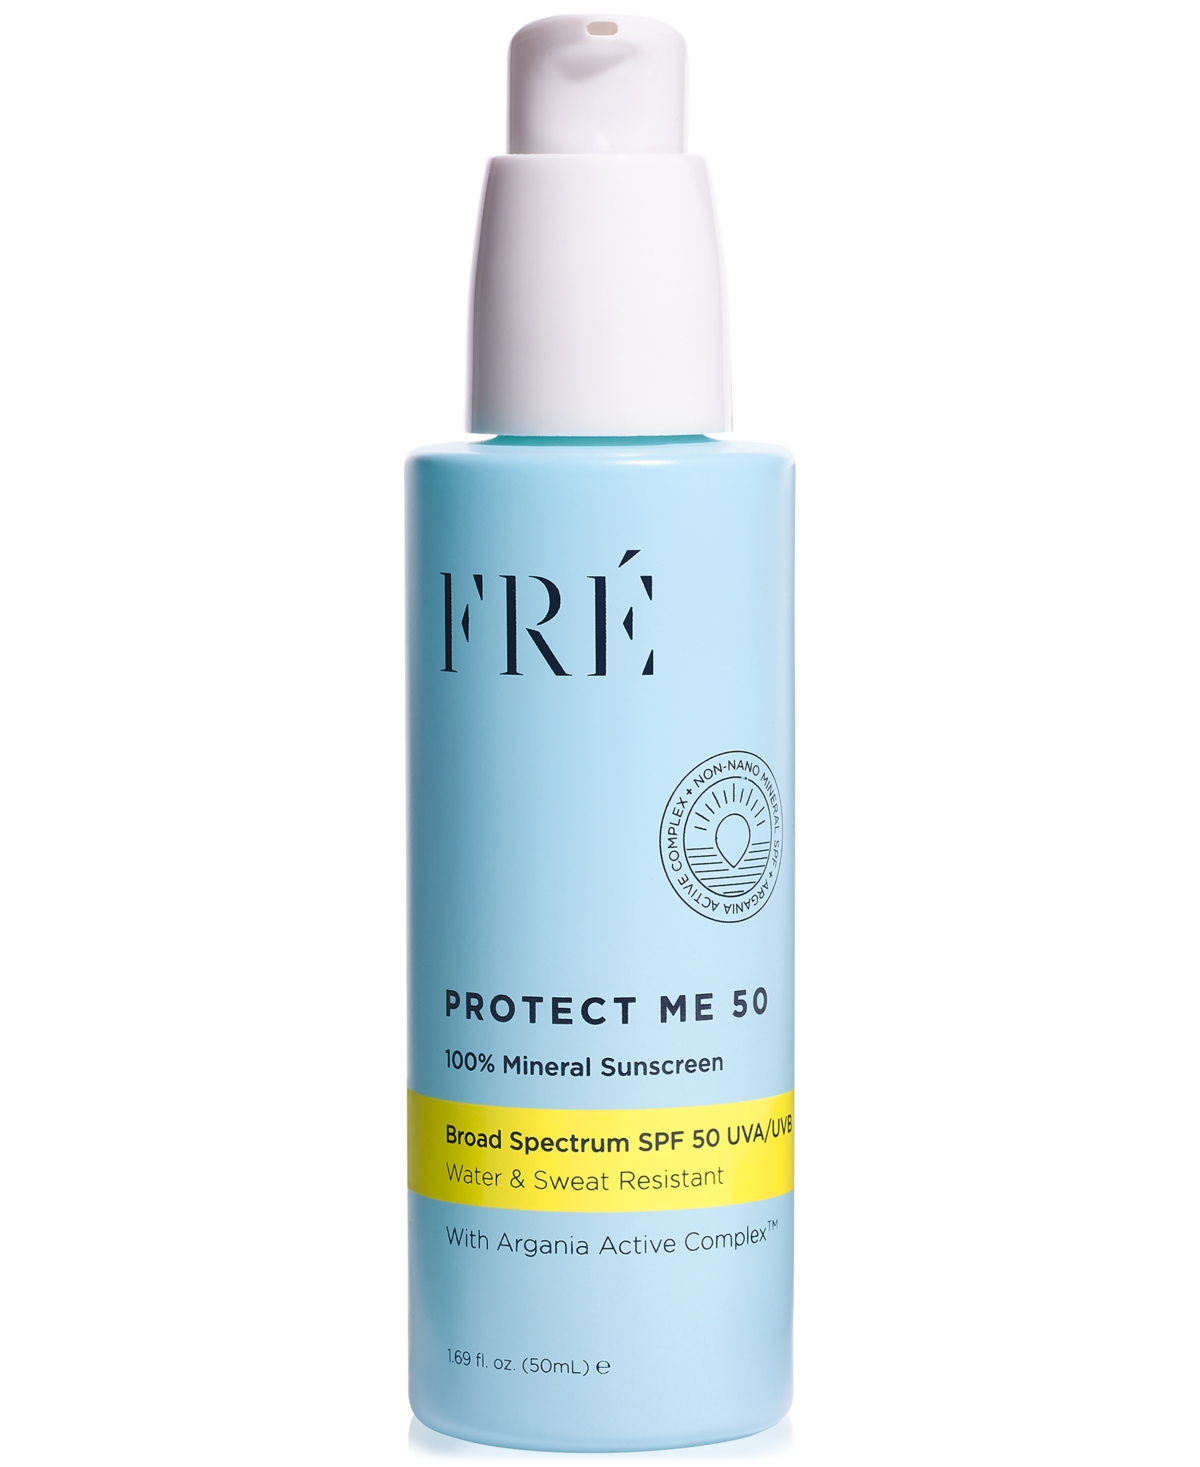 Fre Protect Me 50 Mineral Sunscreen & Moisturizer, 1.69 Oz.